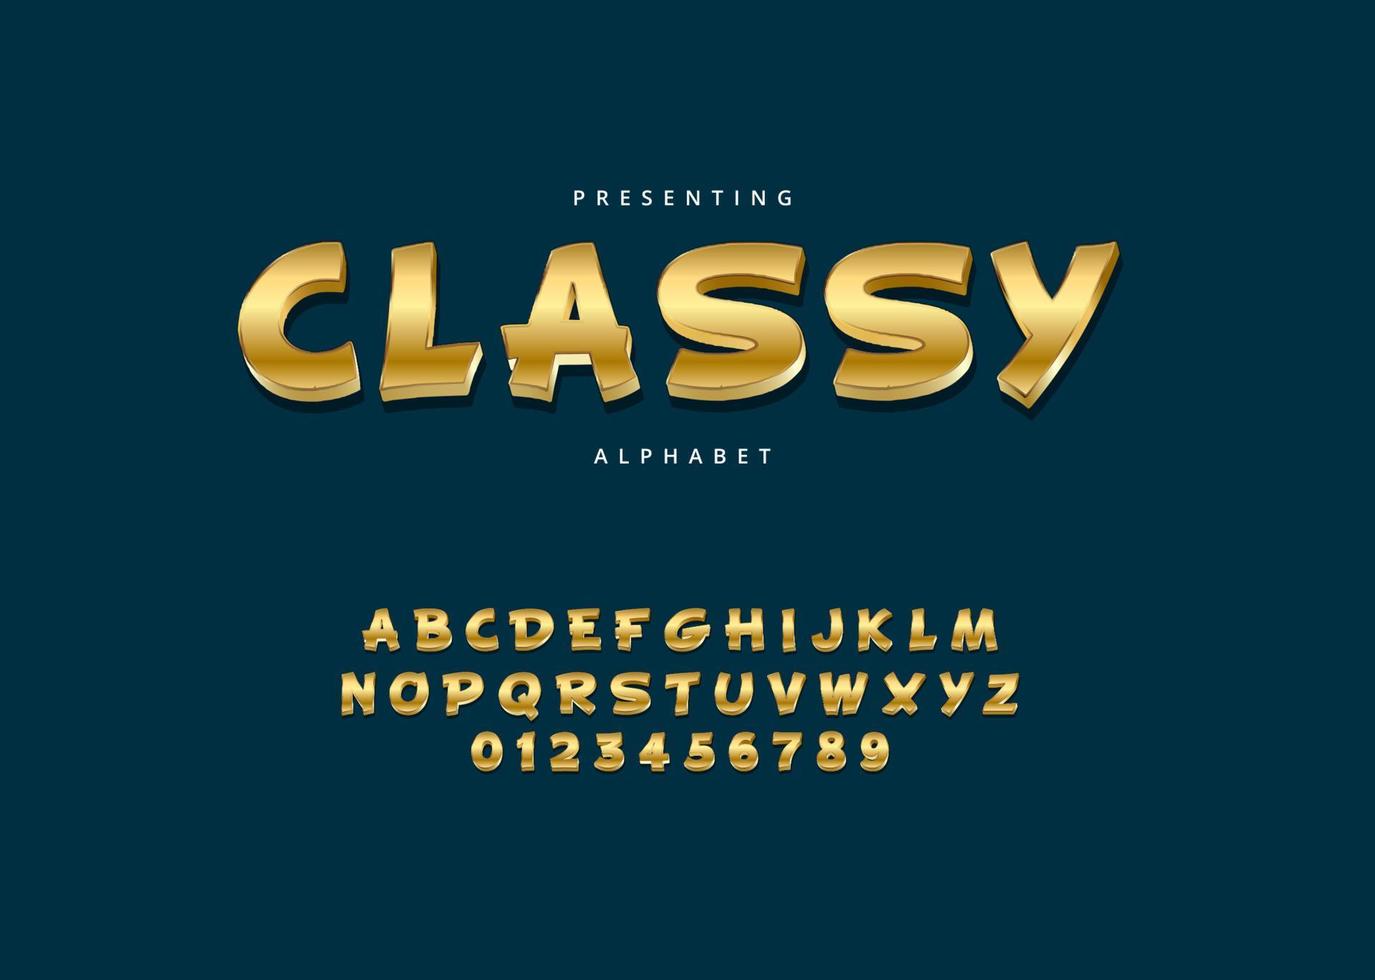 Classy display custom style font, metallic gold alphabet letter and number vector